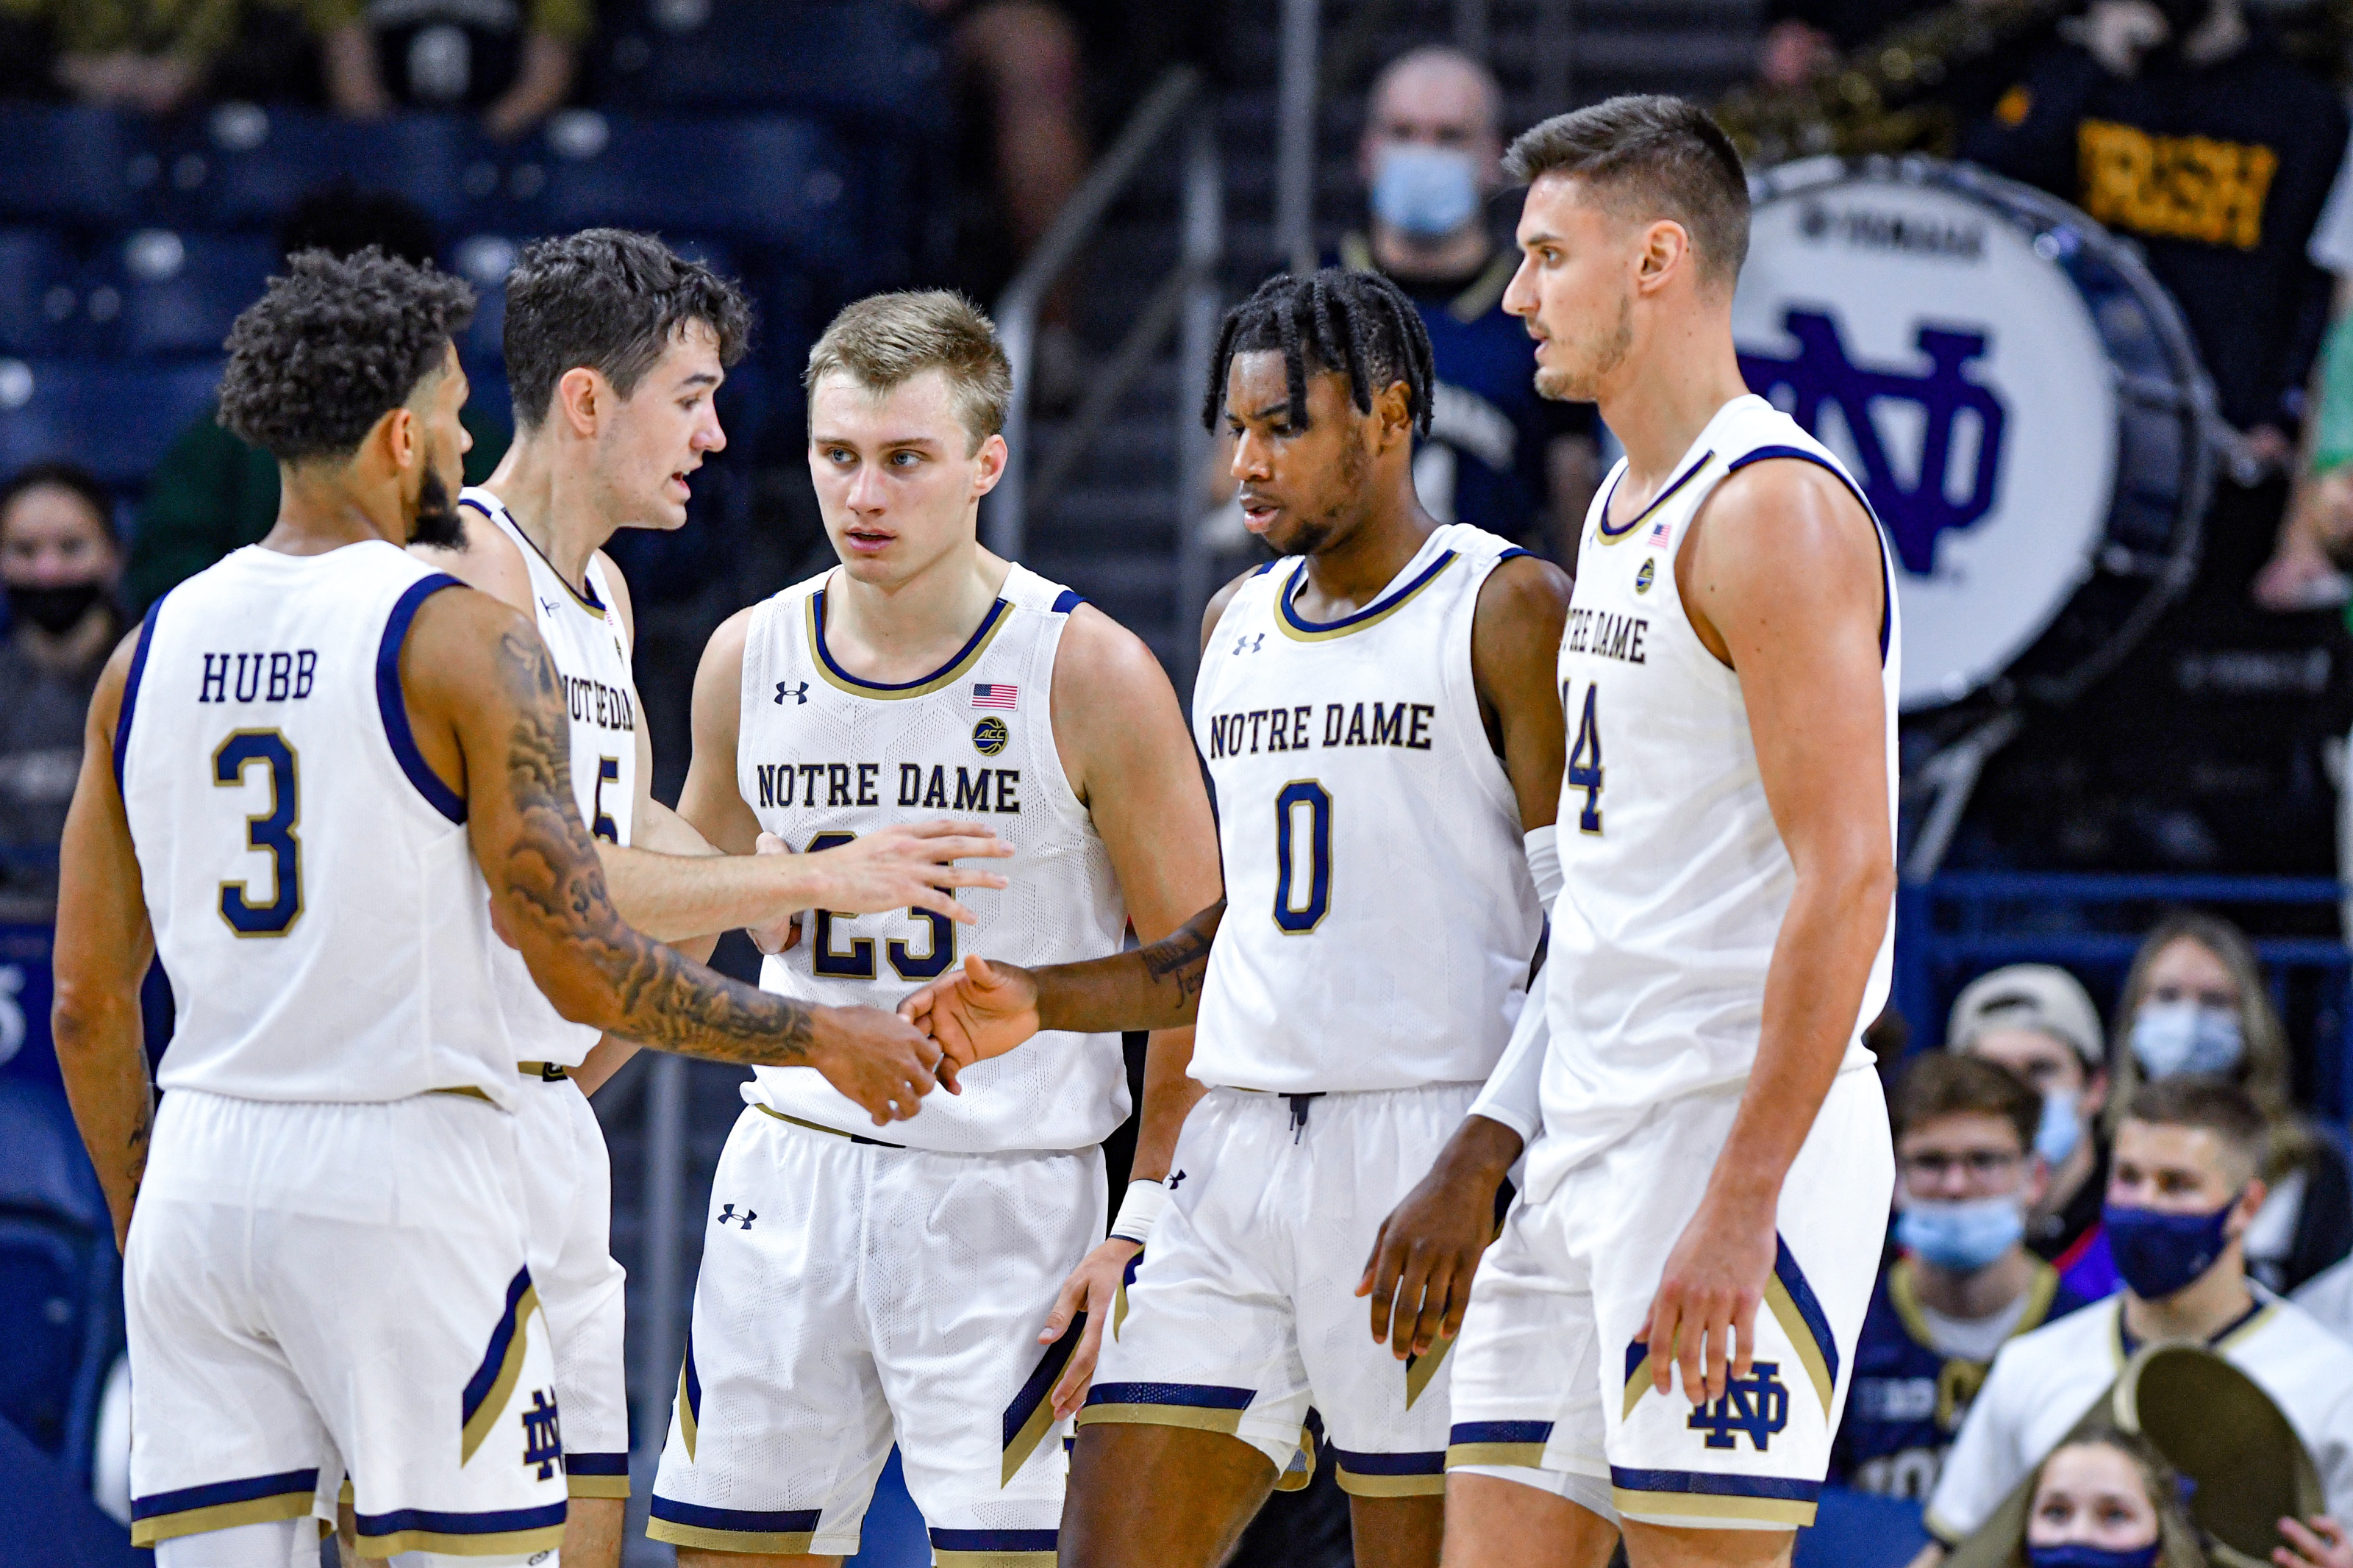 Notre Dame basketball Game Today Irish vs Pitt Line, Predictions, Odds, TV Channel and Live Stream for Basketball Game Mar